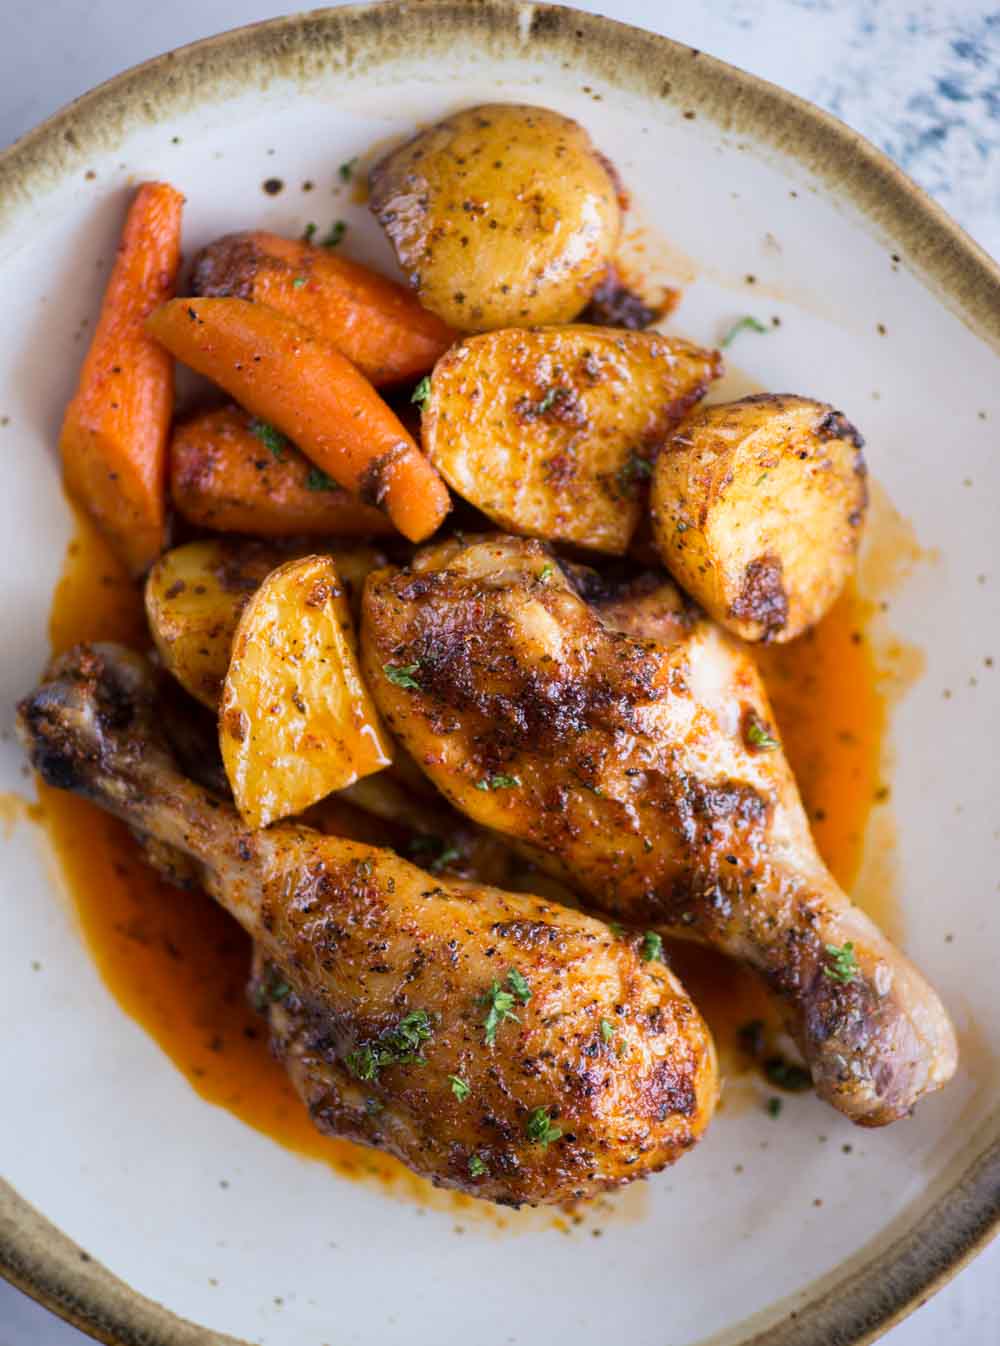 Chicken Legs And Vegetables - The of kitchen